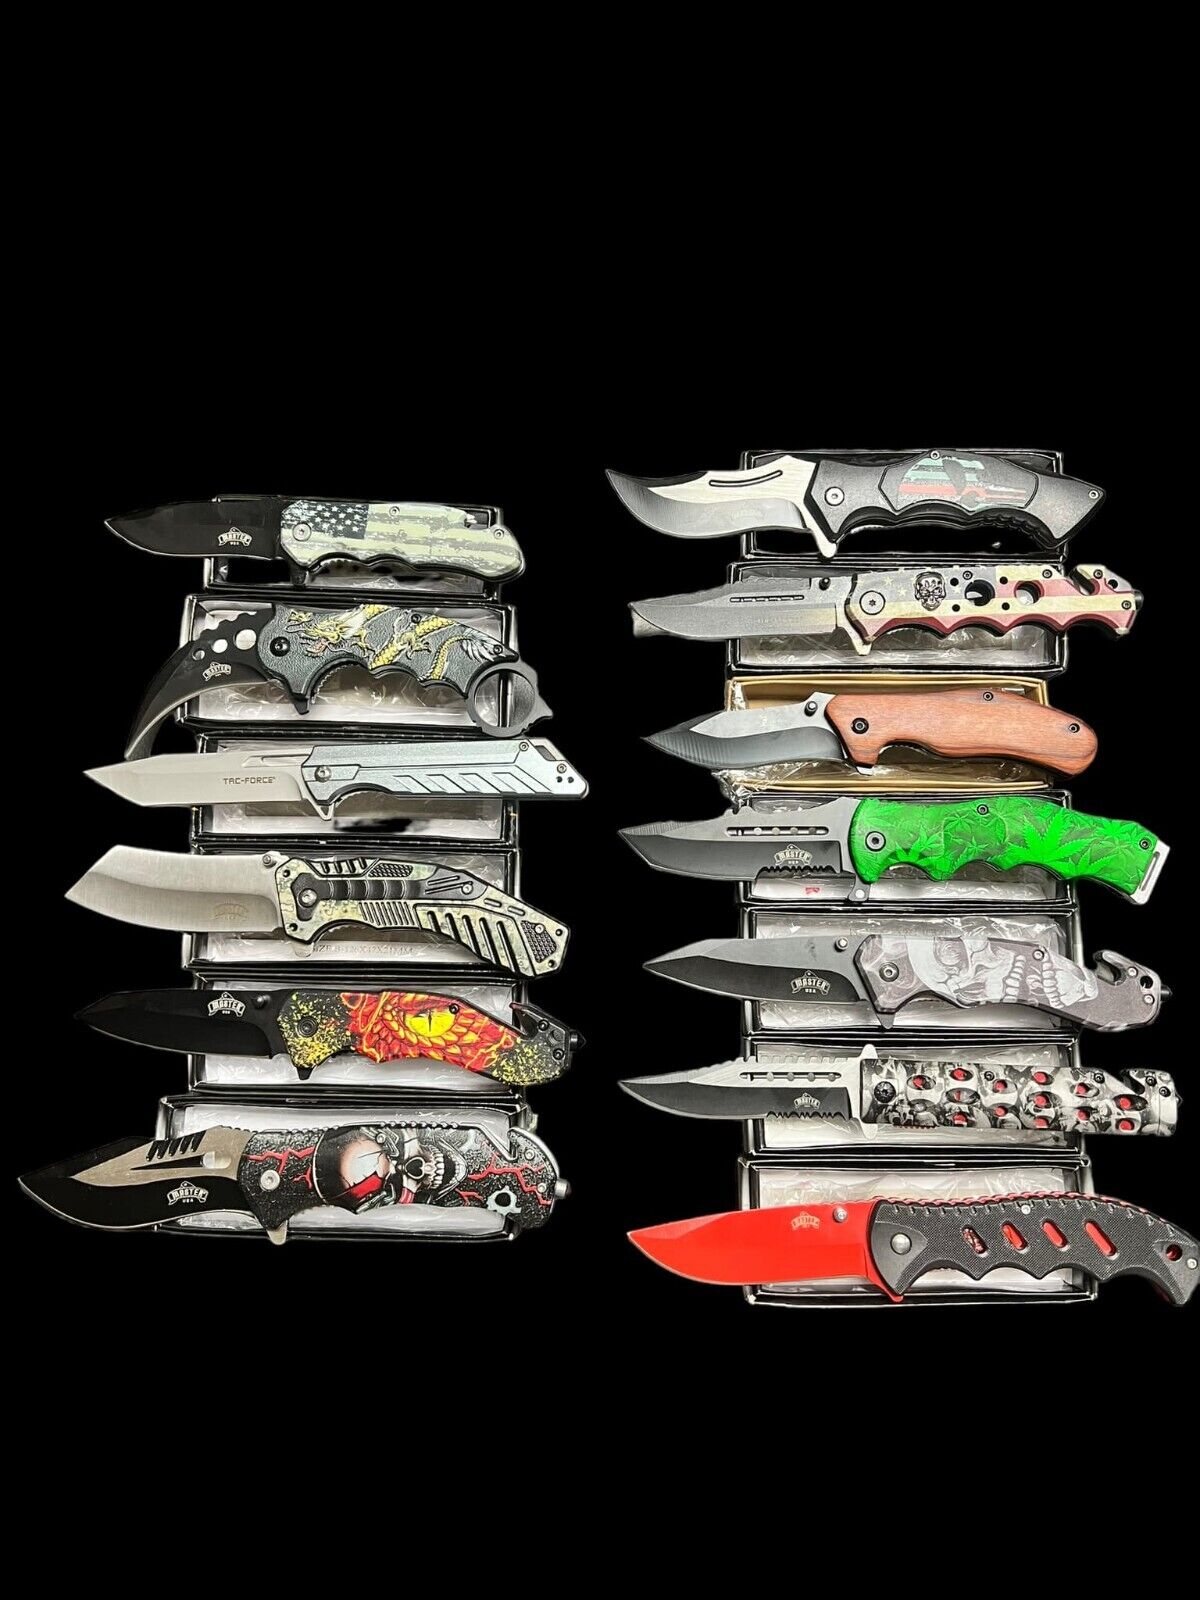 LOT OF 45 Spring Assisted pocket knife Collectible Design Wholesale Knives AS-IS Без бренда - фотография #11